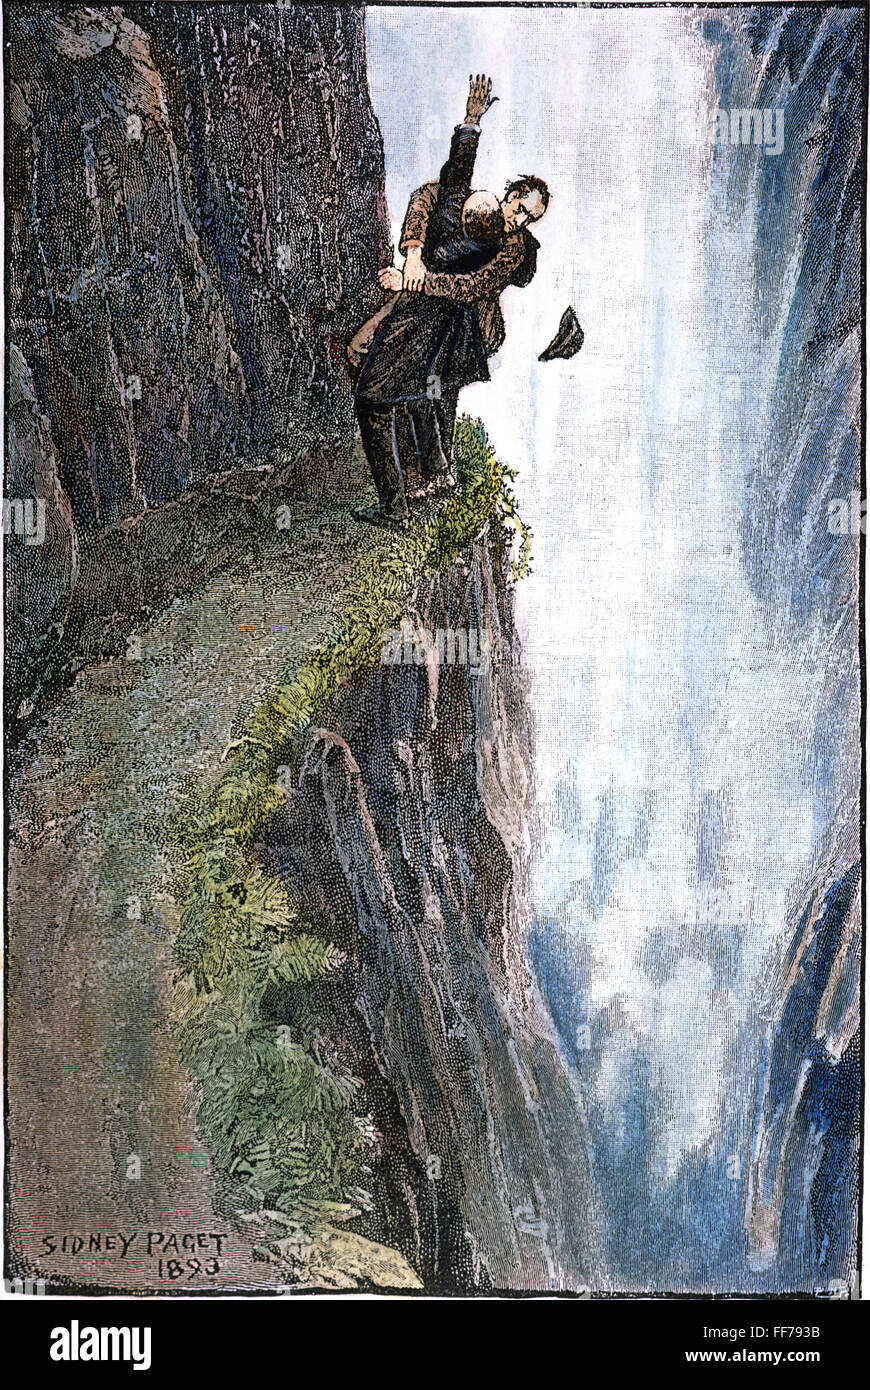 DOYLE: SHERLOCK HOLMES. /nSherlock Holmes and Professor Moriarty locked in mortal combat at the Reichenbach Falls. Wood engraving after a drawing by Sidney Paget for Sir Arthur Conan Doyle's 'The Adventure of the Final Problem,' 1893. Stock Photo